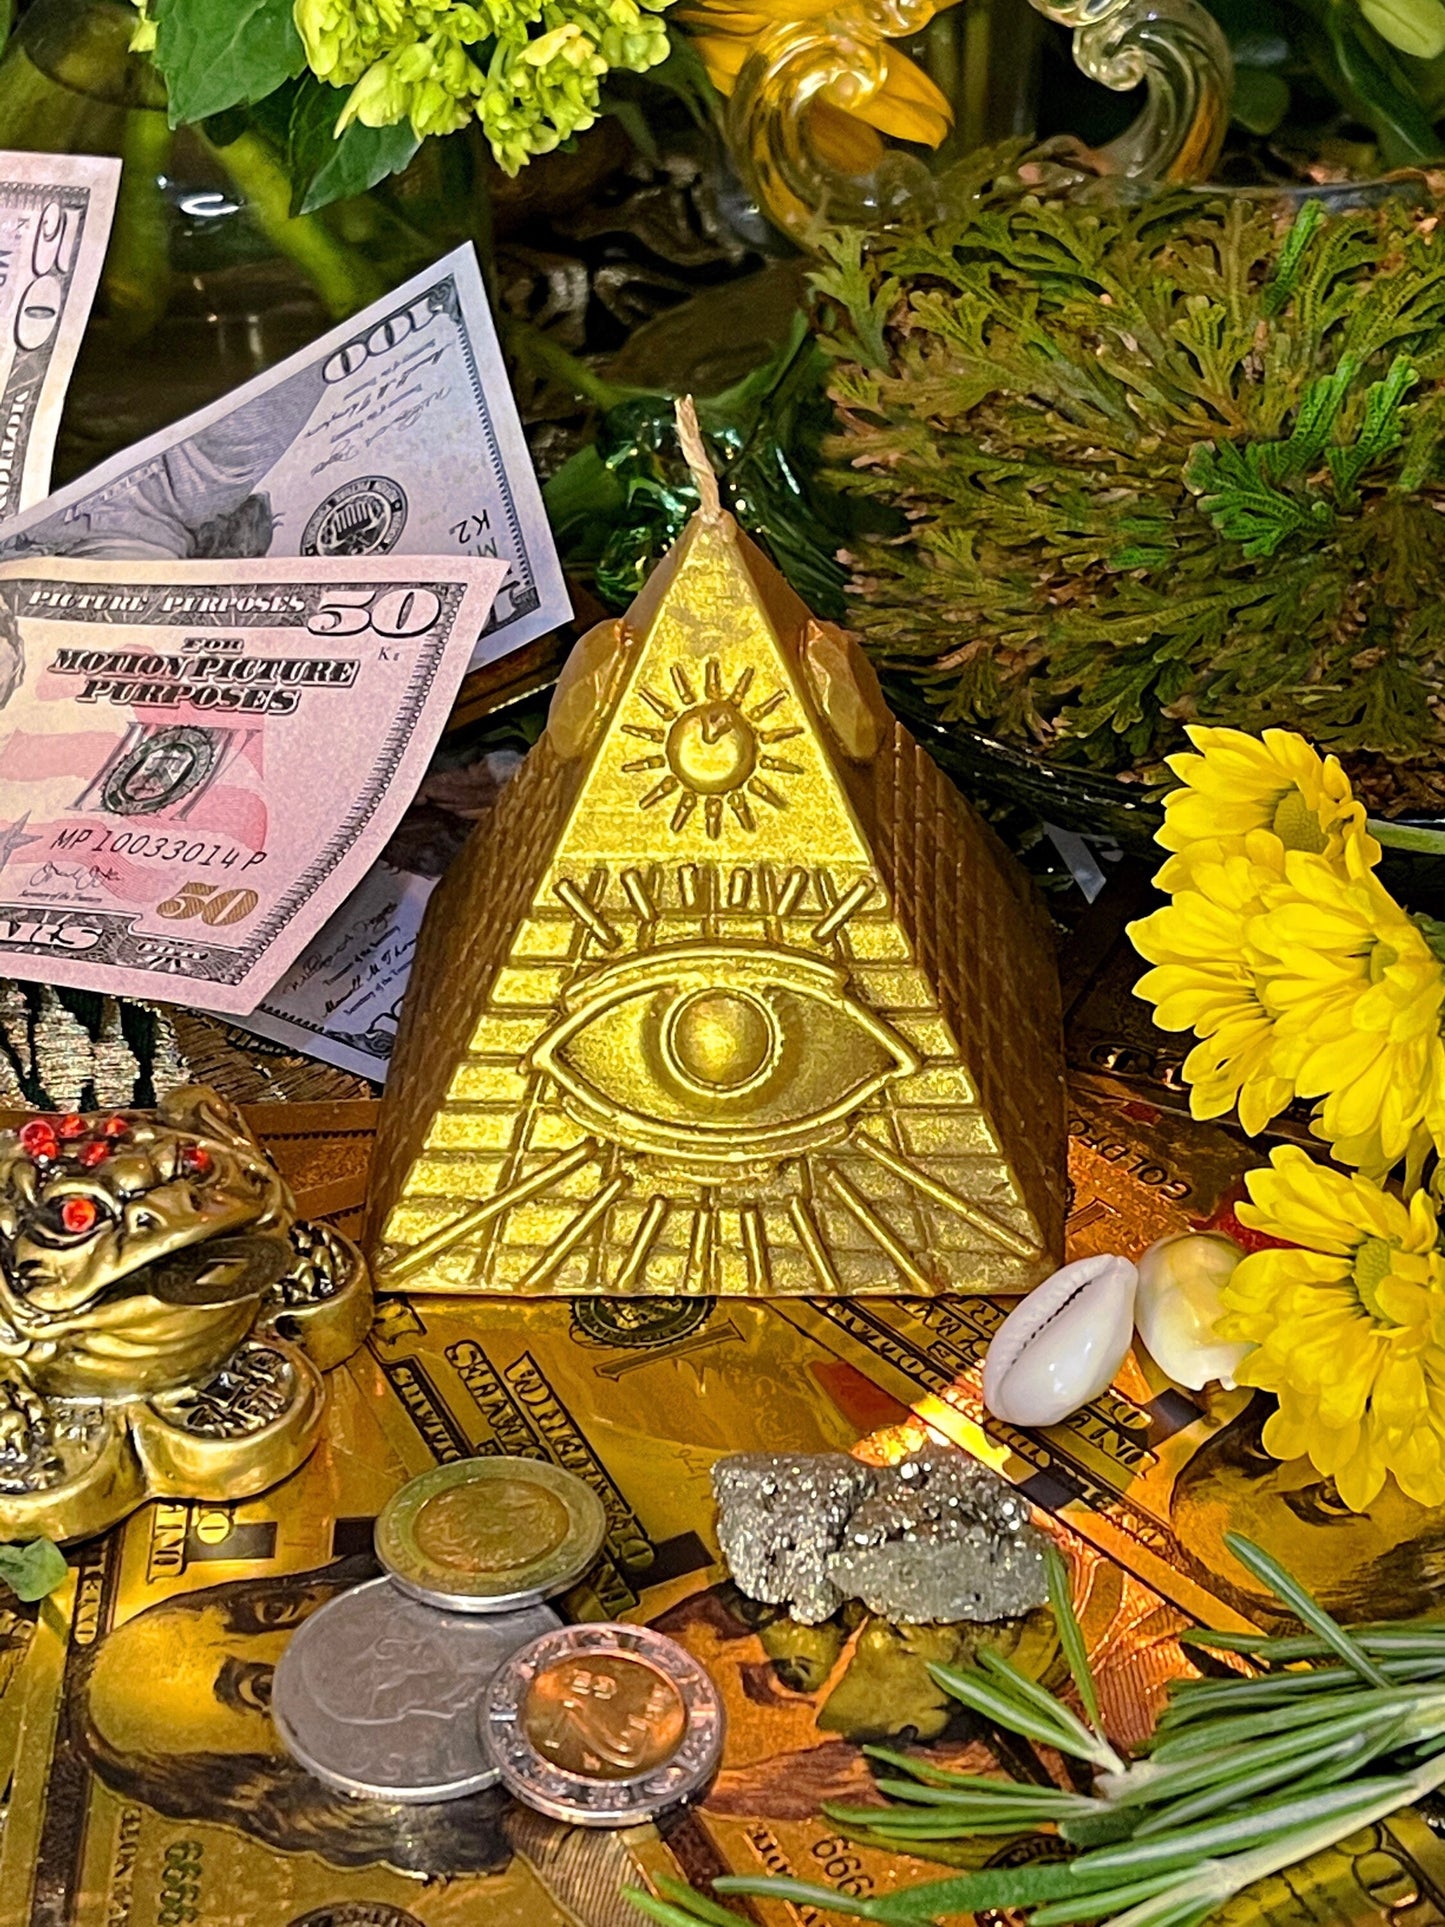 Pyramid with Eye of Providence Figure Candle + All-Seeing Eye